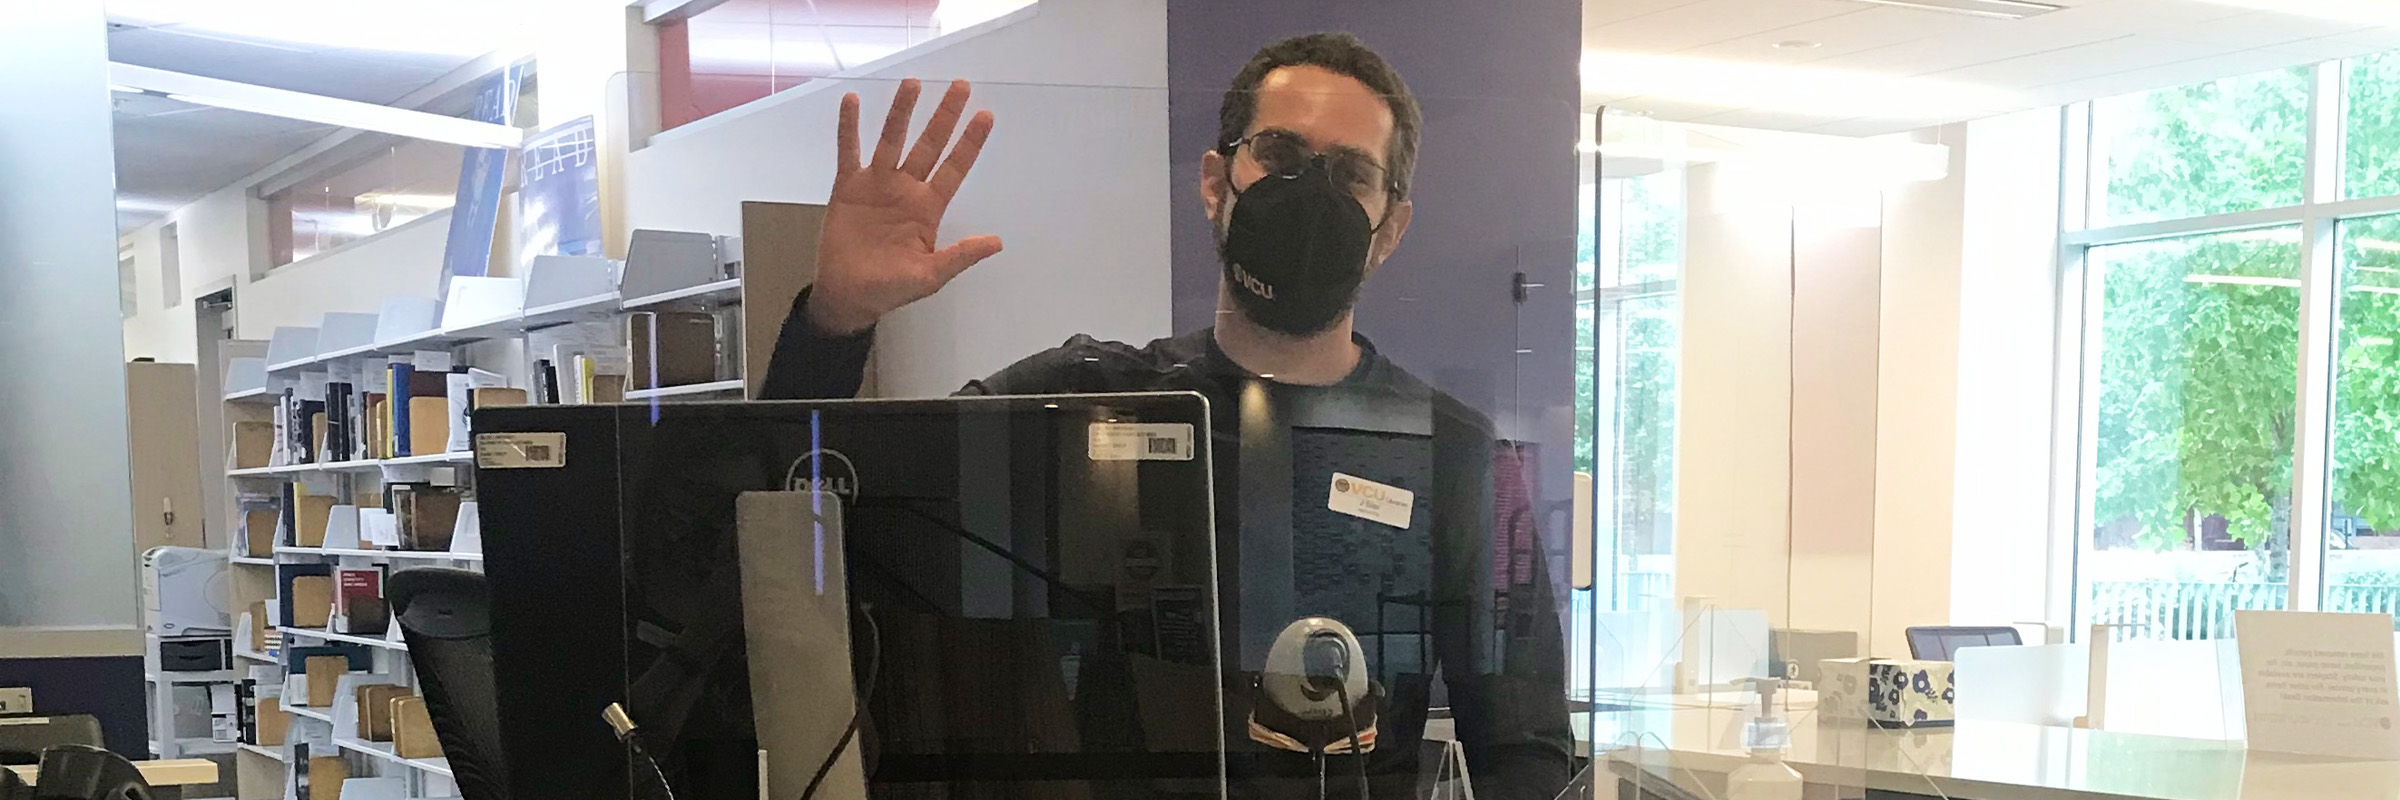 Library staff member, wearing a mask, waves behind a plexiglass shield at an information desk.